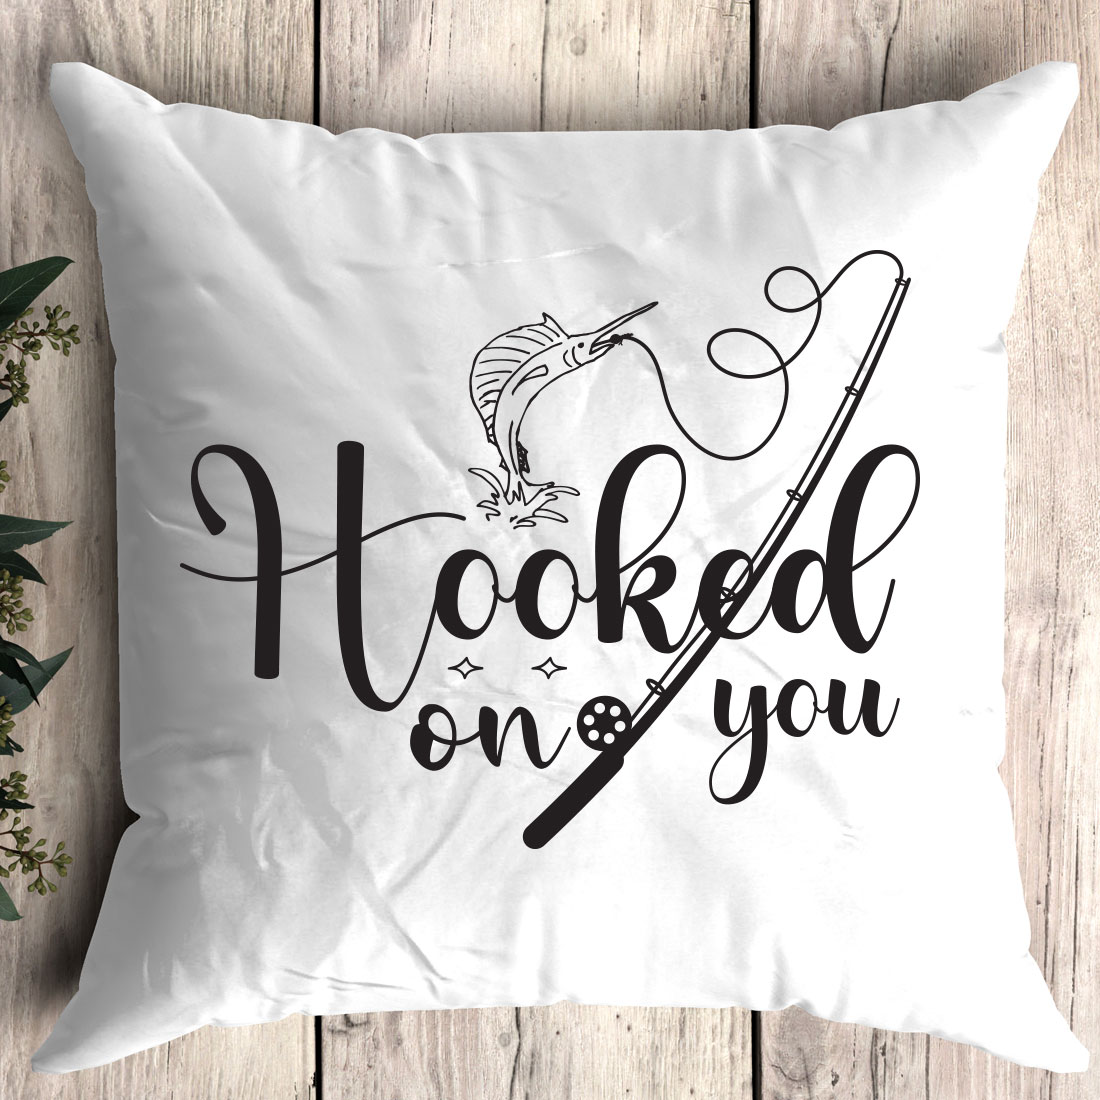 White pillow with the words hooked on you printed on it.